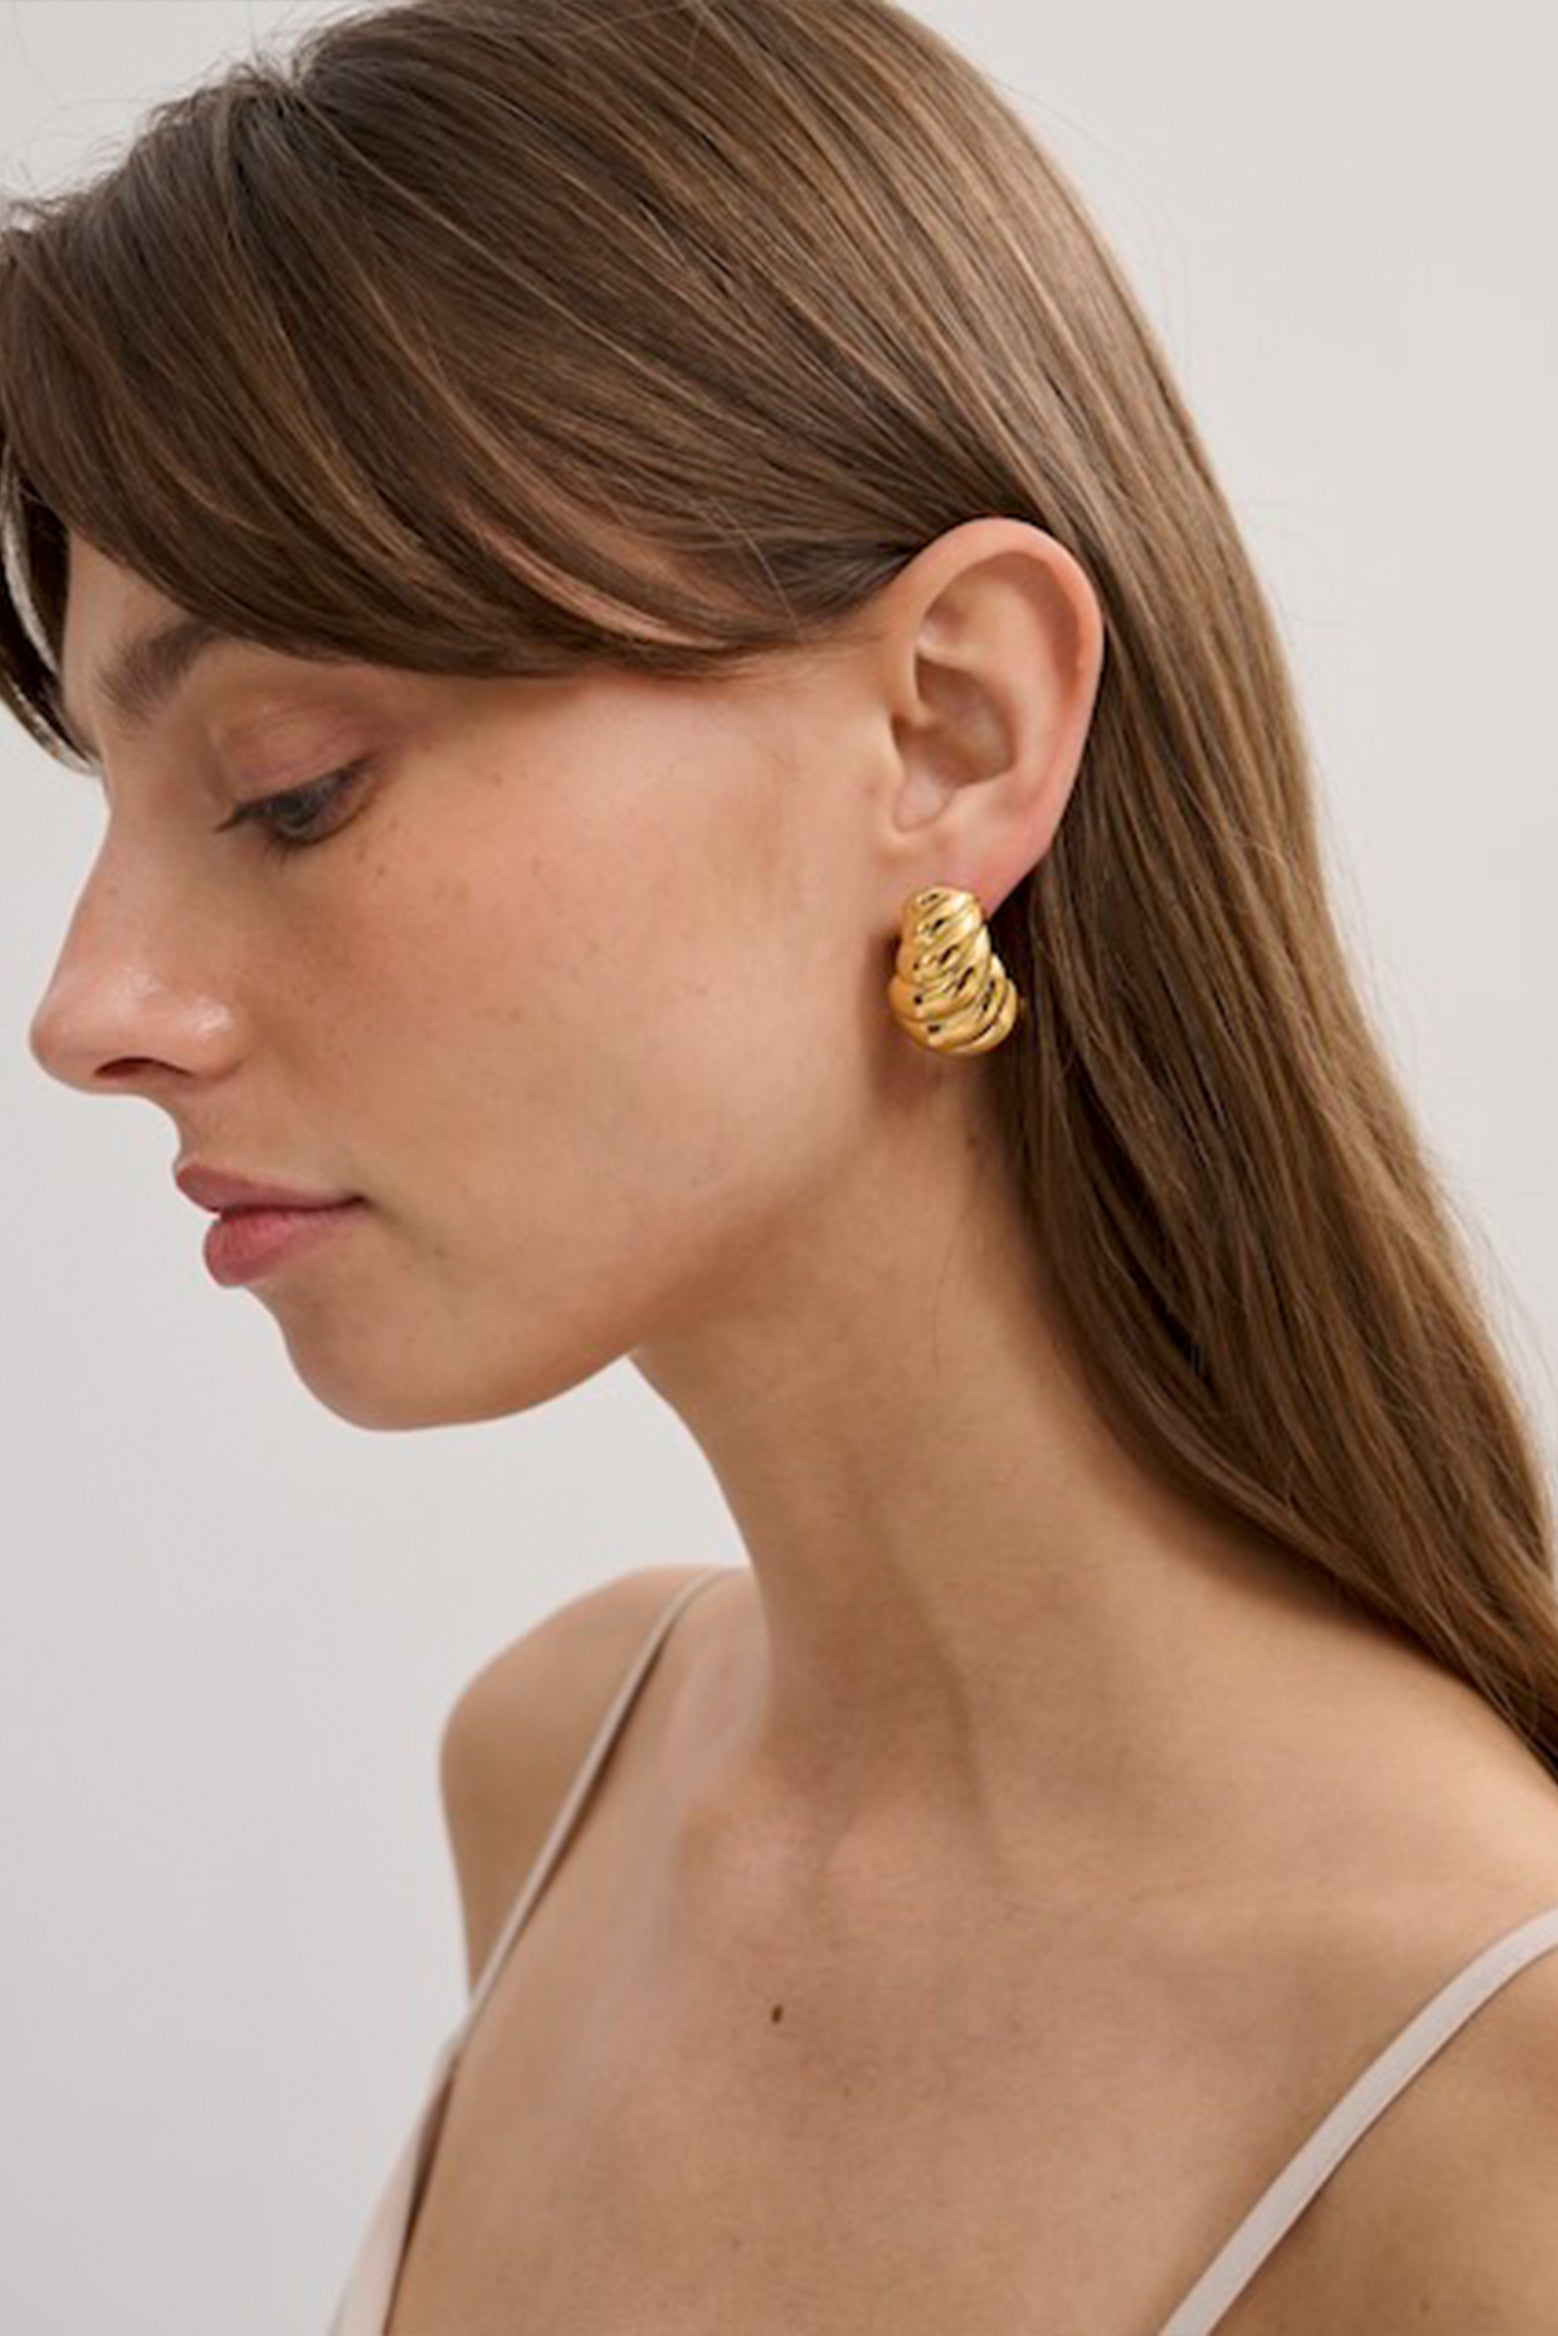 Anna Rossi Ascending Scallop Earring in Gold available at The New Trend Australia.